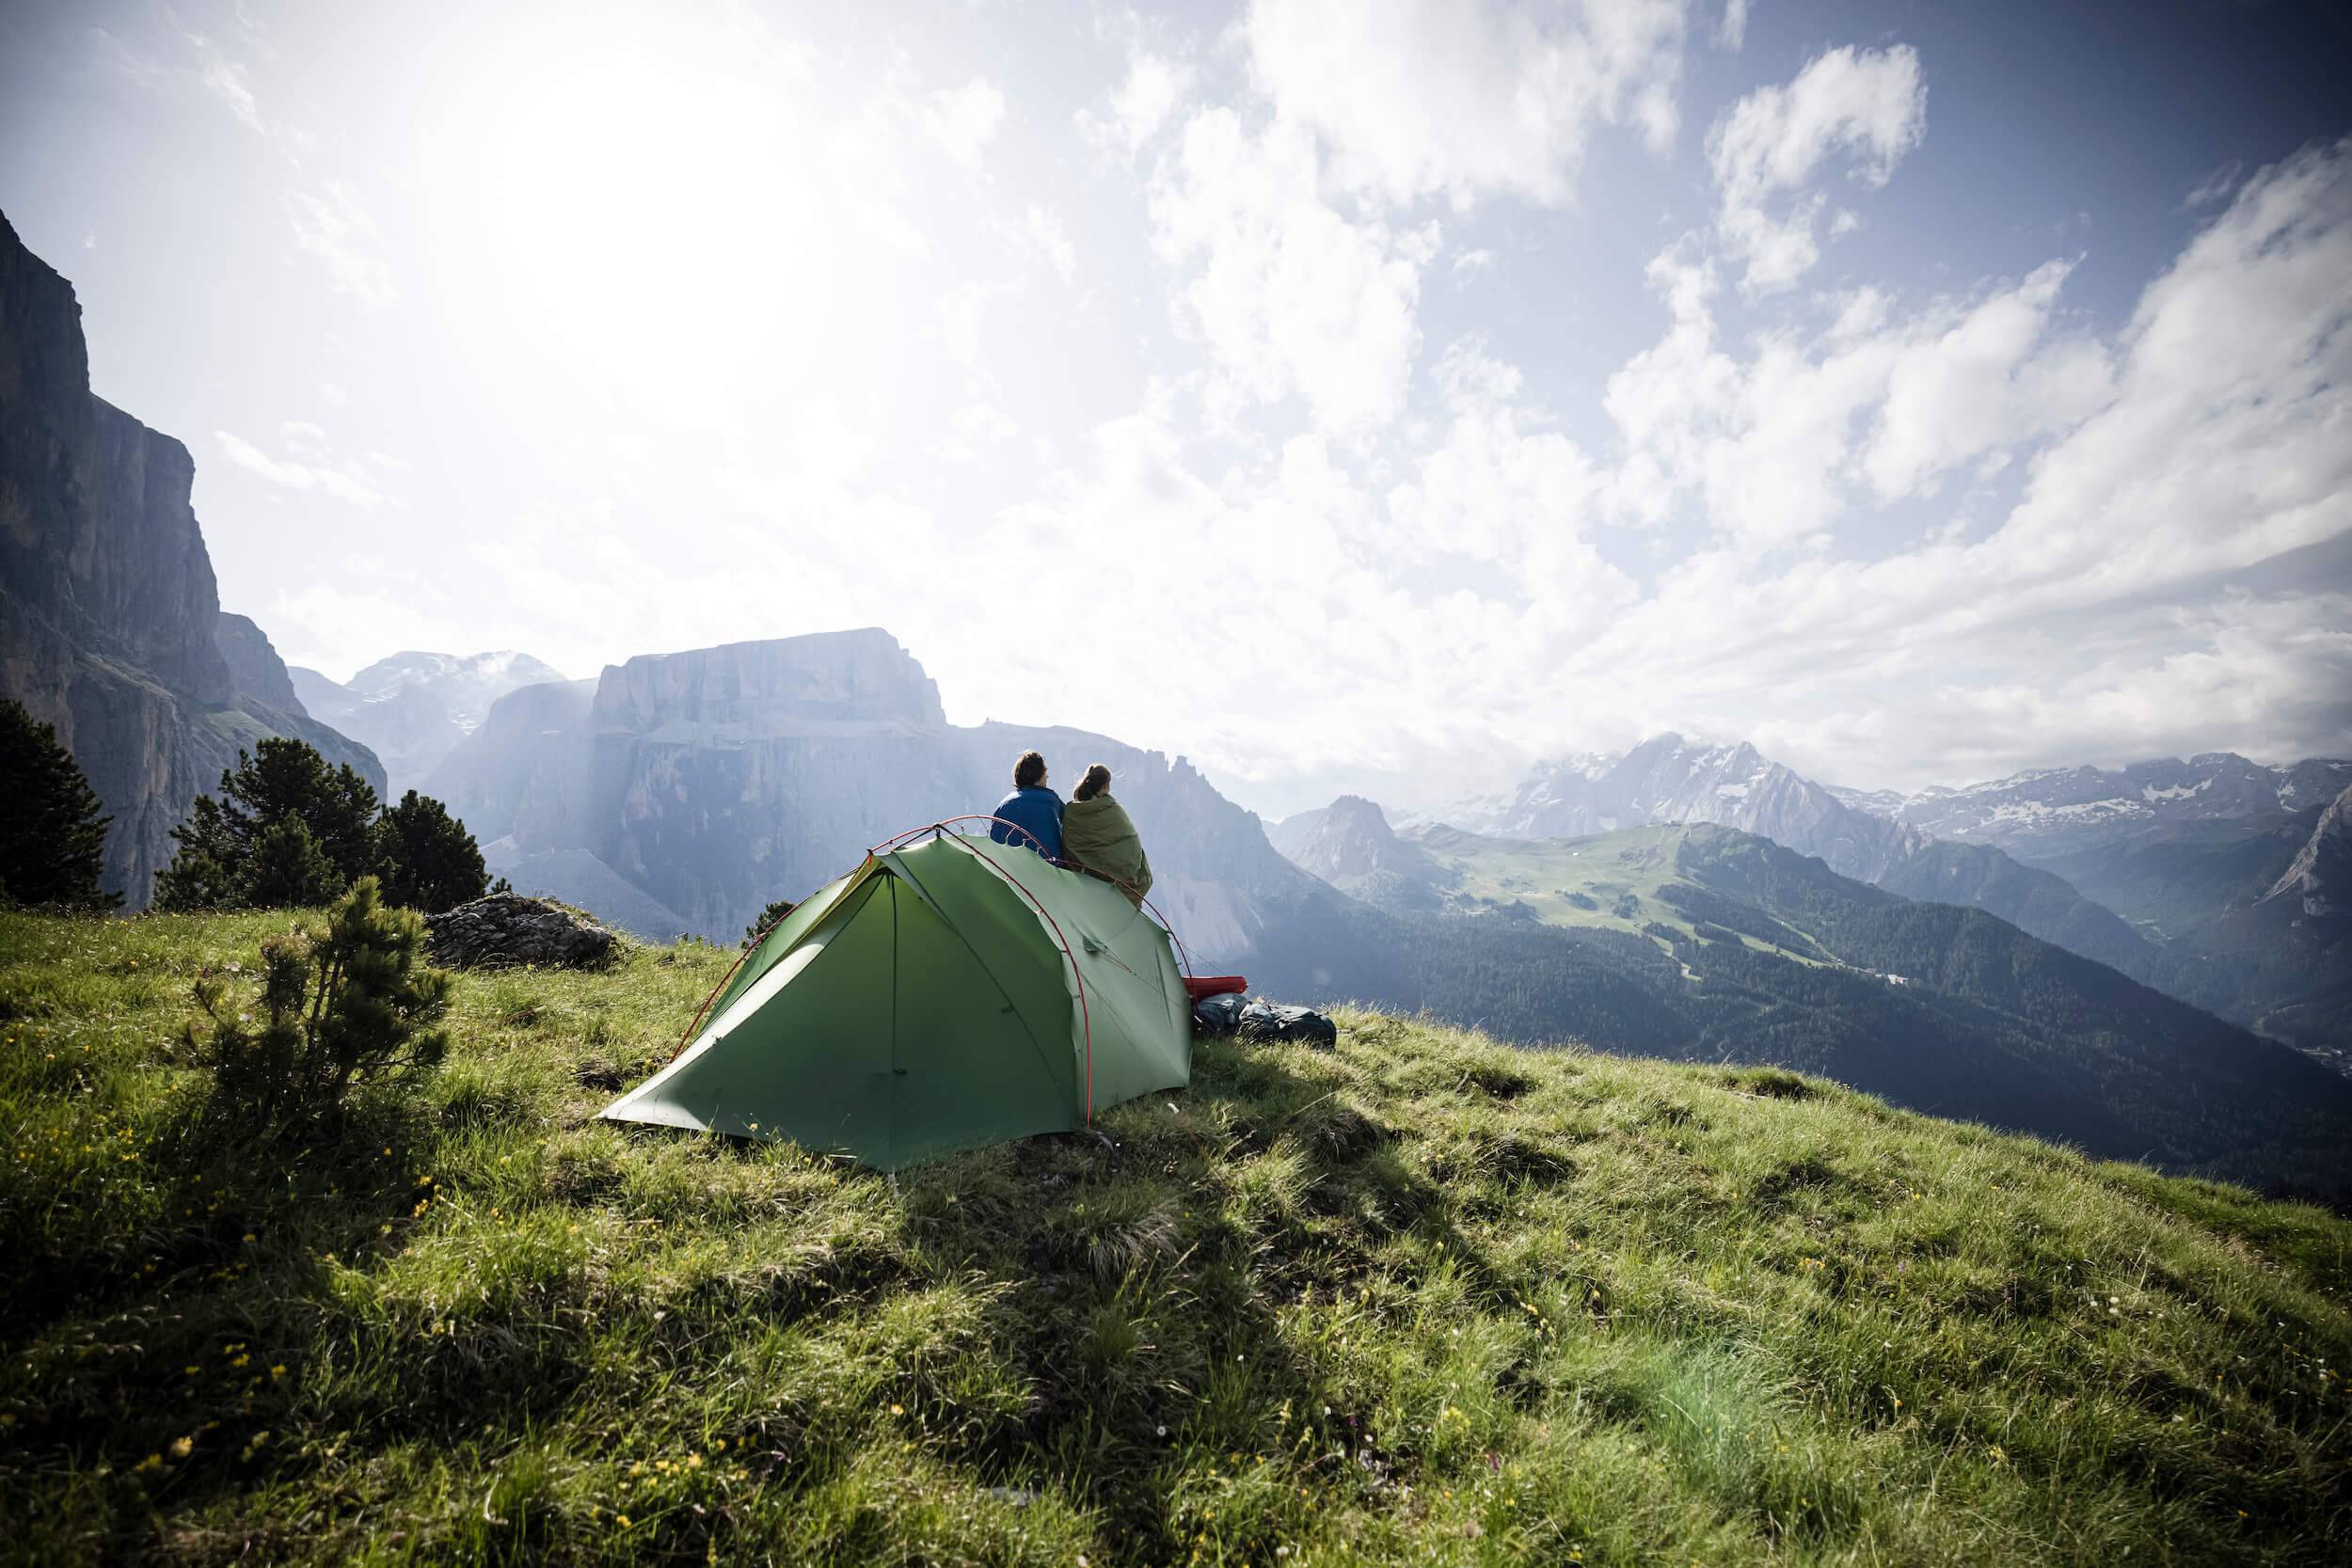 Win a Vaude two-person tent worth £450